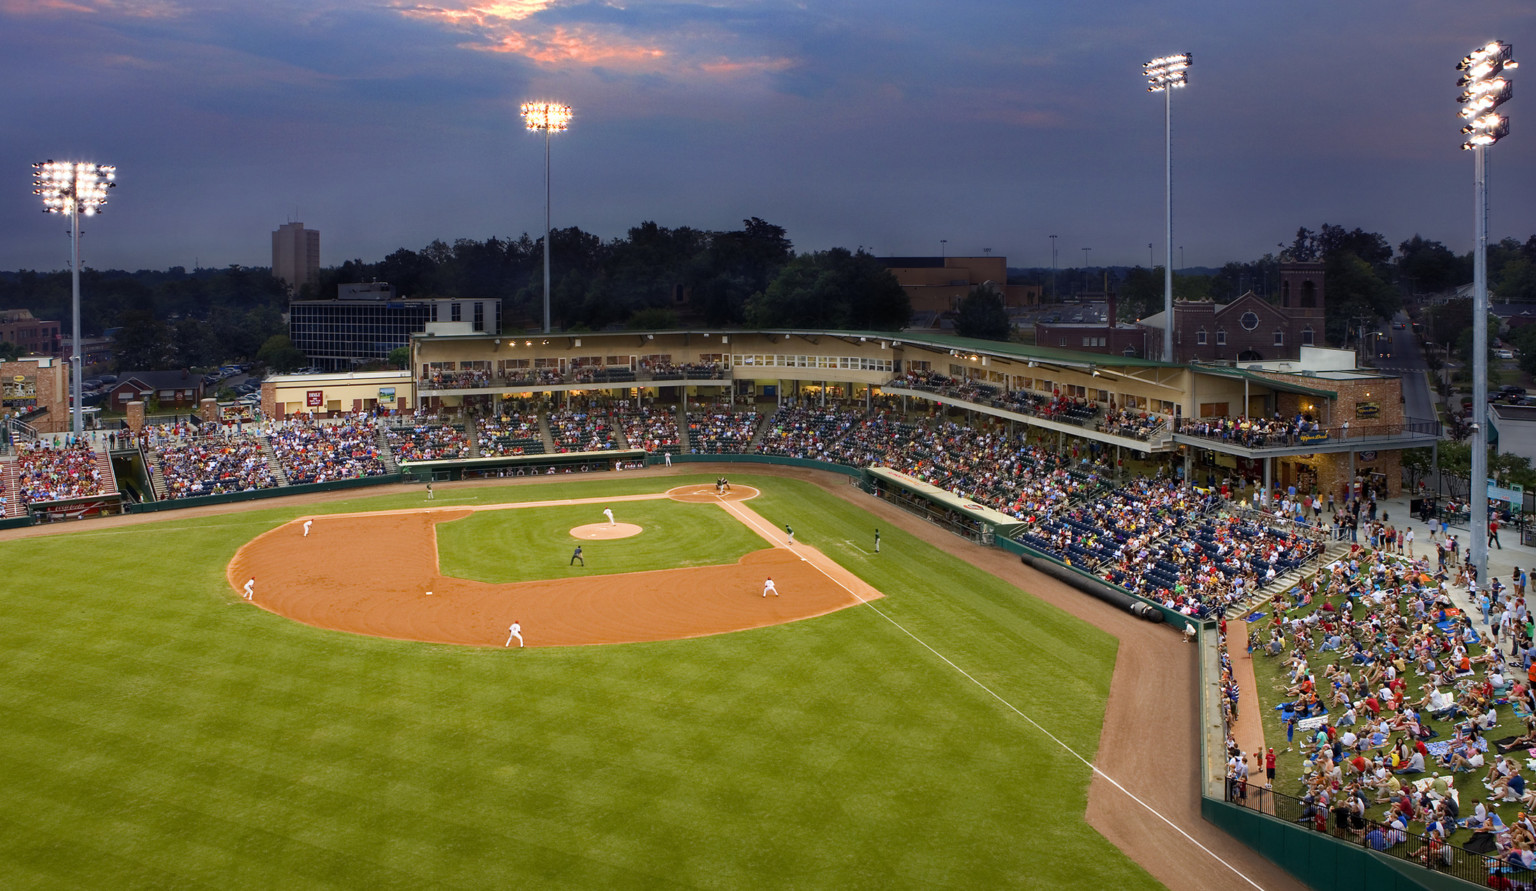 Fluor Field, home to the Greenville Drive, from above, with lawn seating by 3rd base foul line, and suites behind home plate